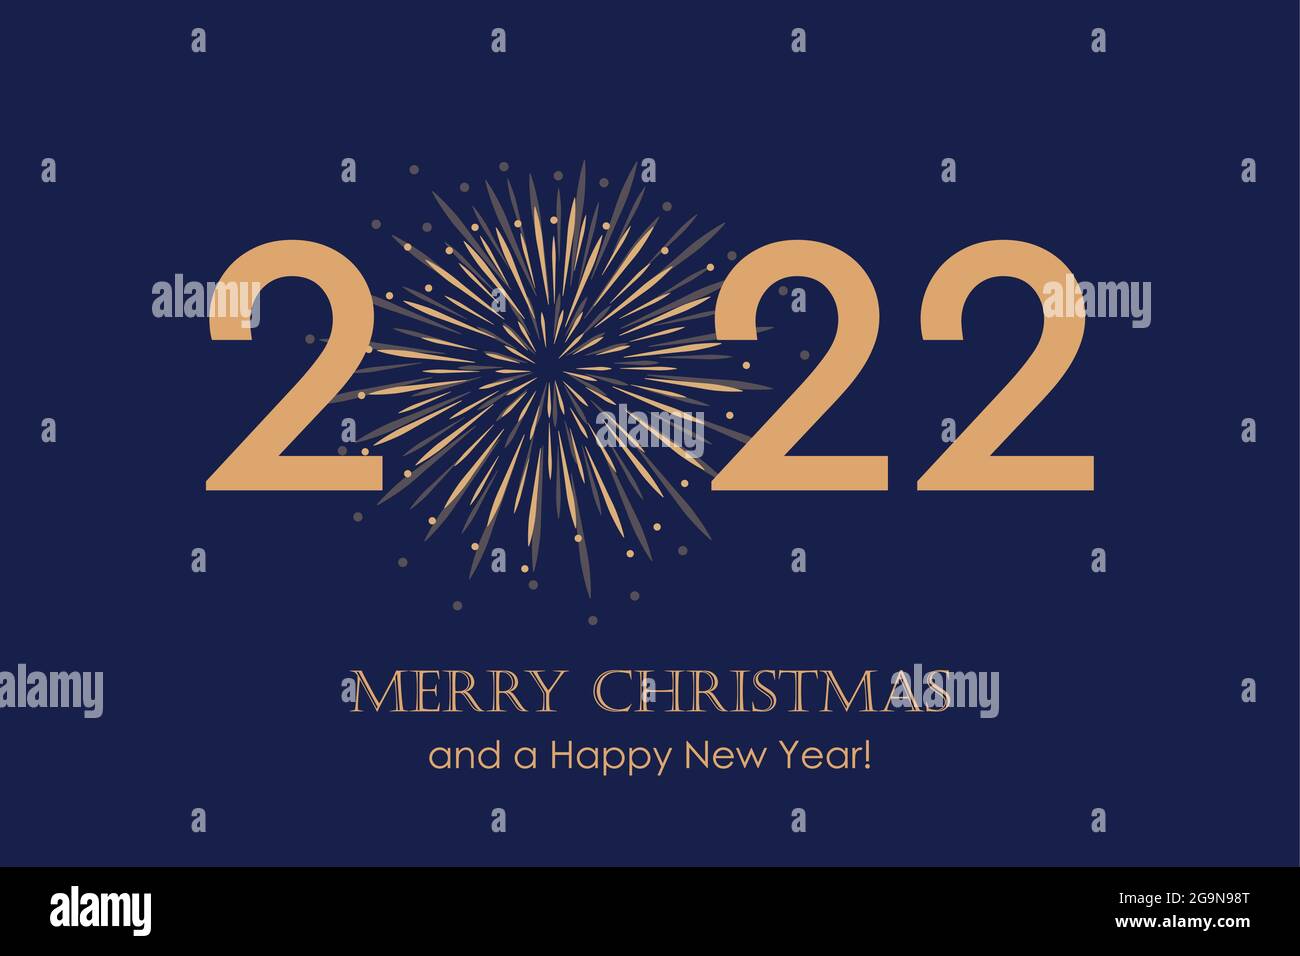 christian new year background 2022